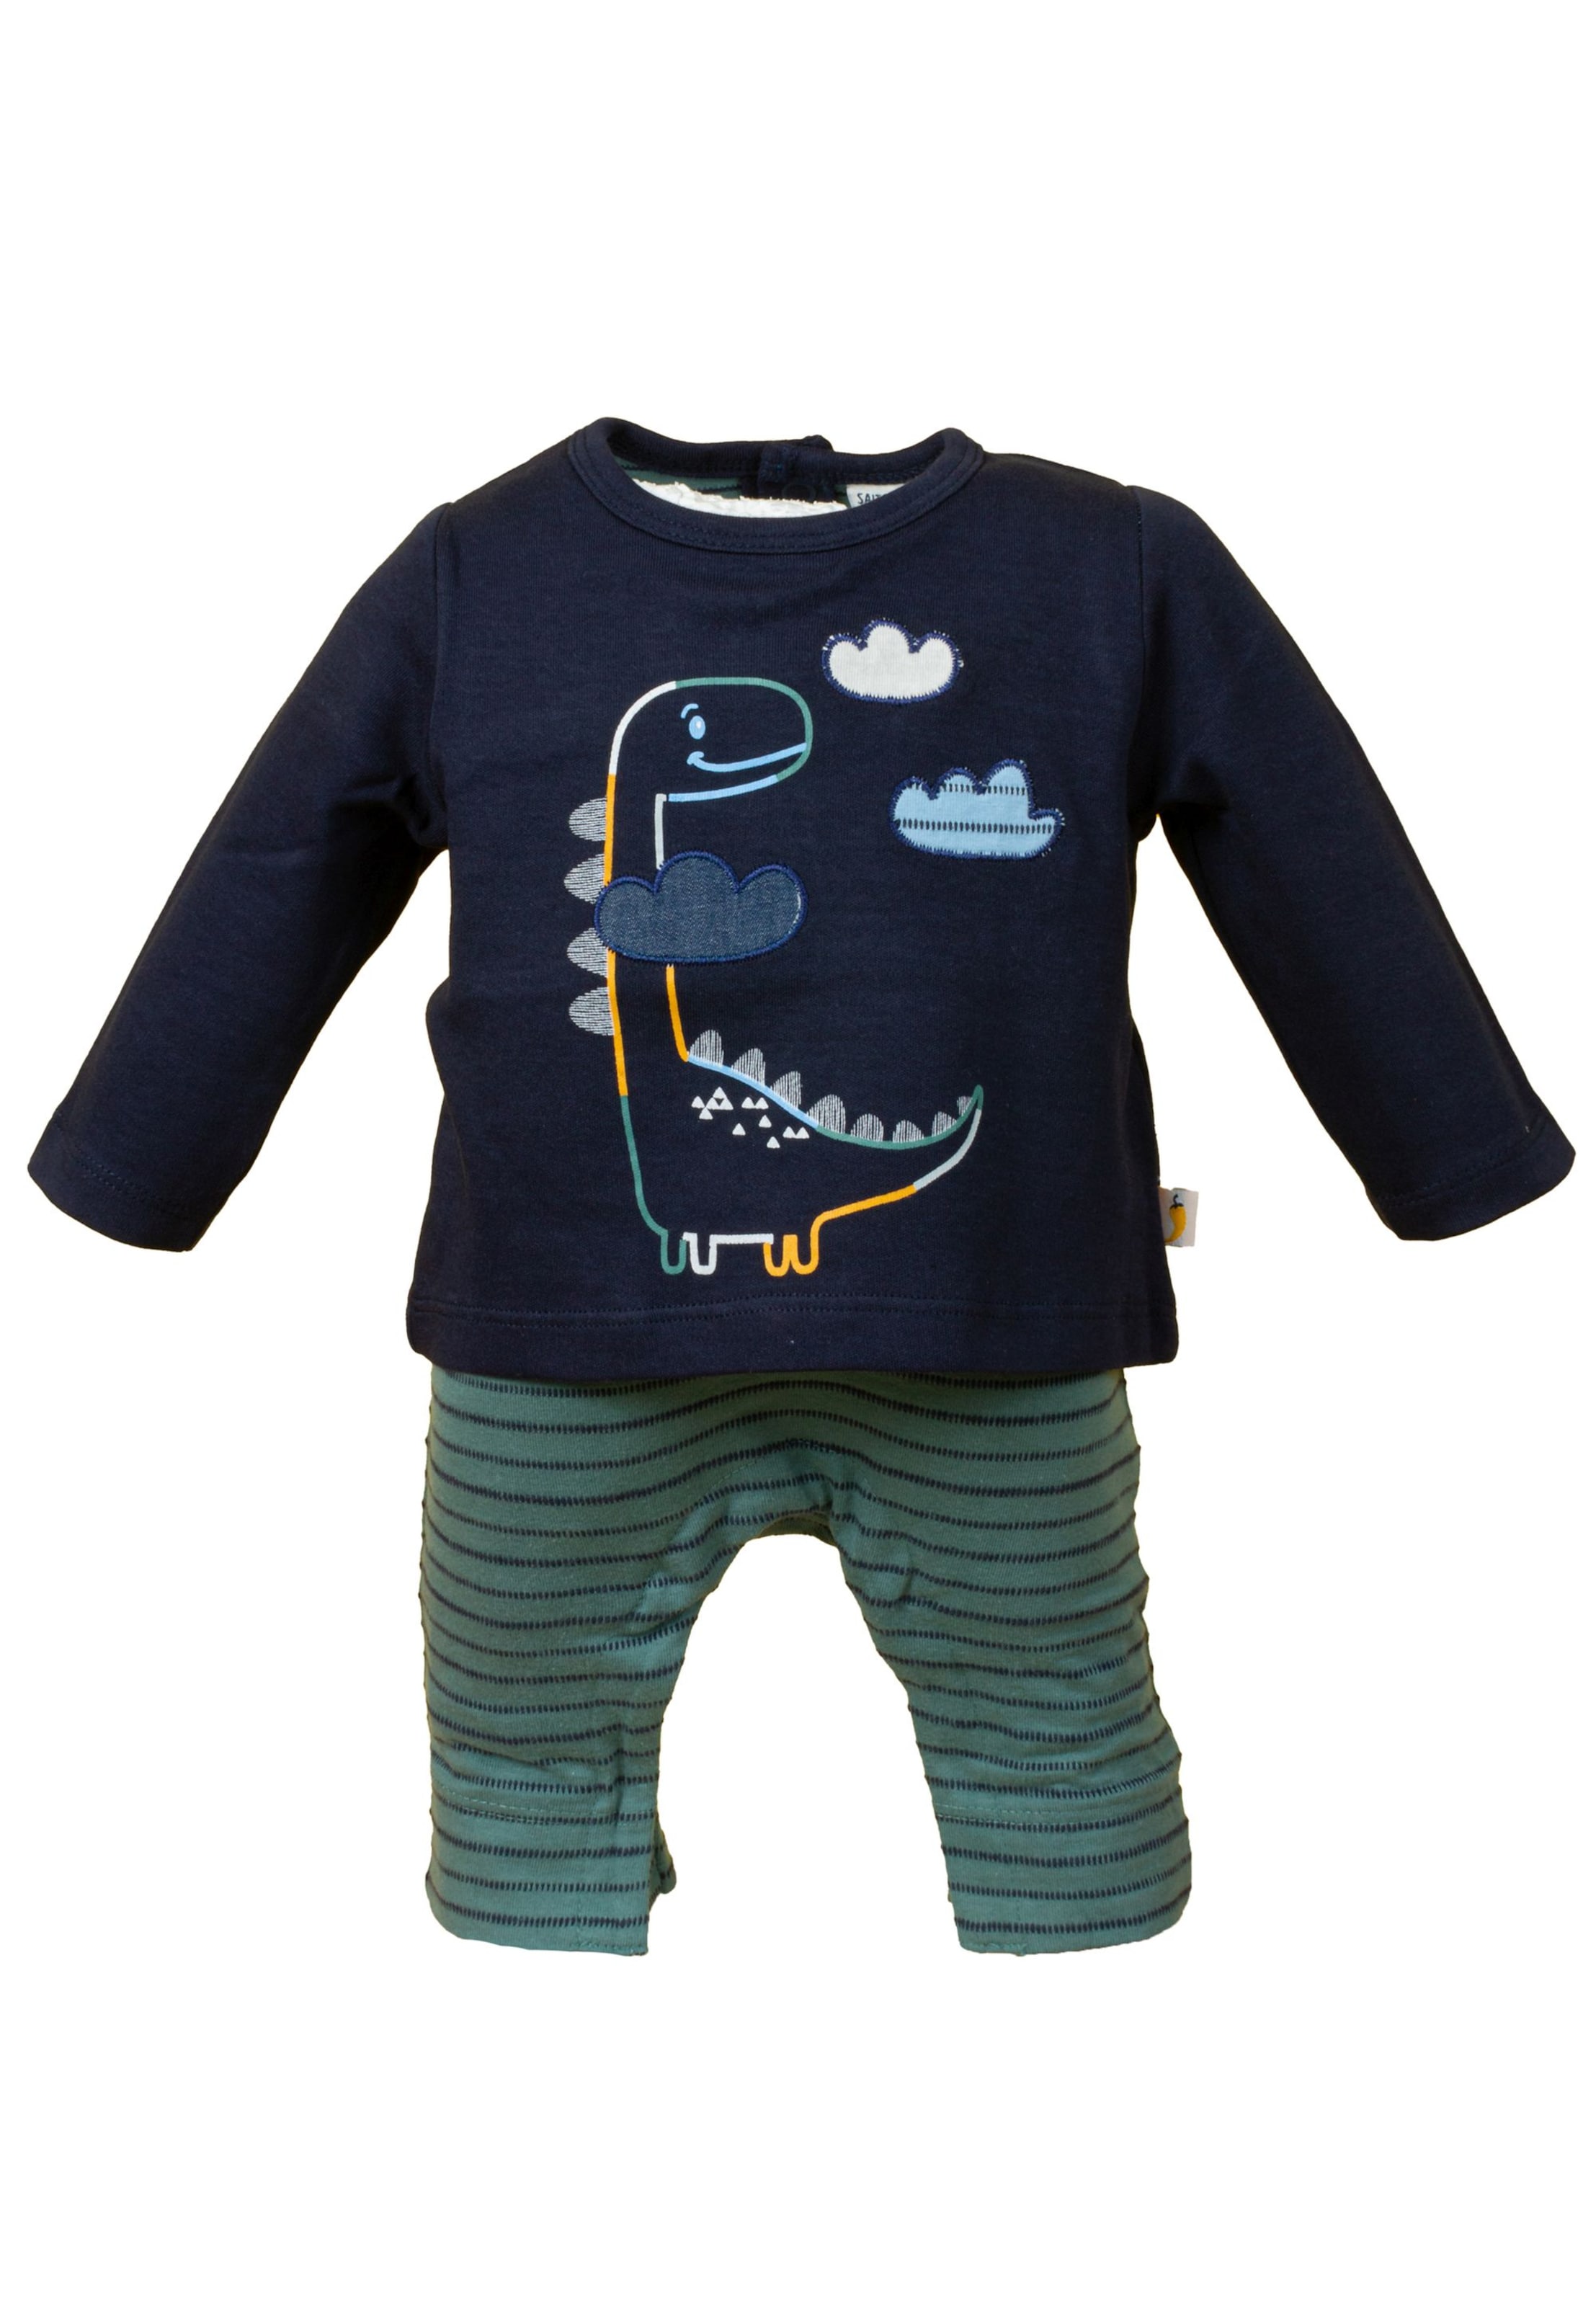 Kinder Bekleidung SALT AND PEPPER Overall 'Wild Thing' in Navy - YI48917